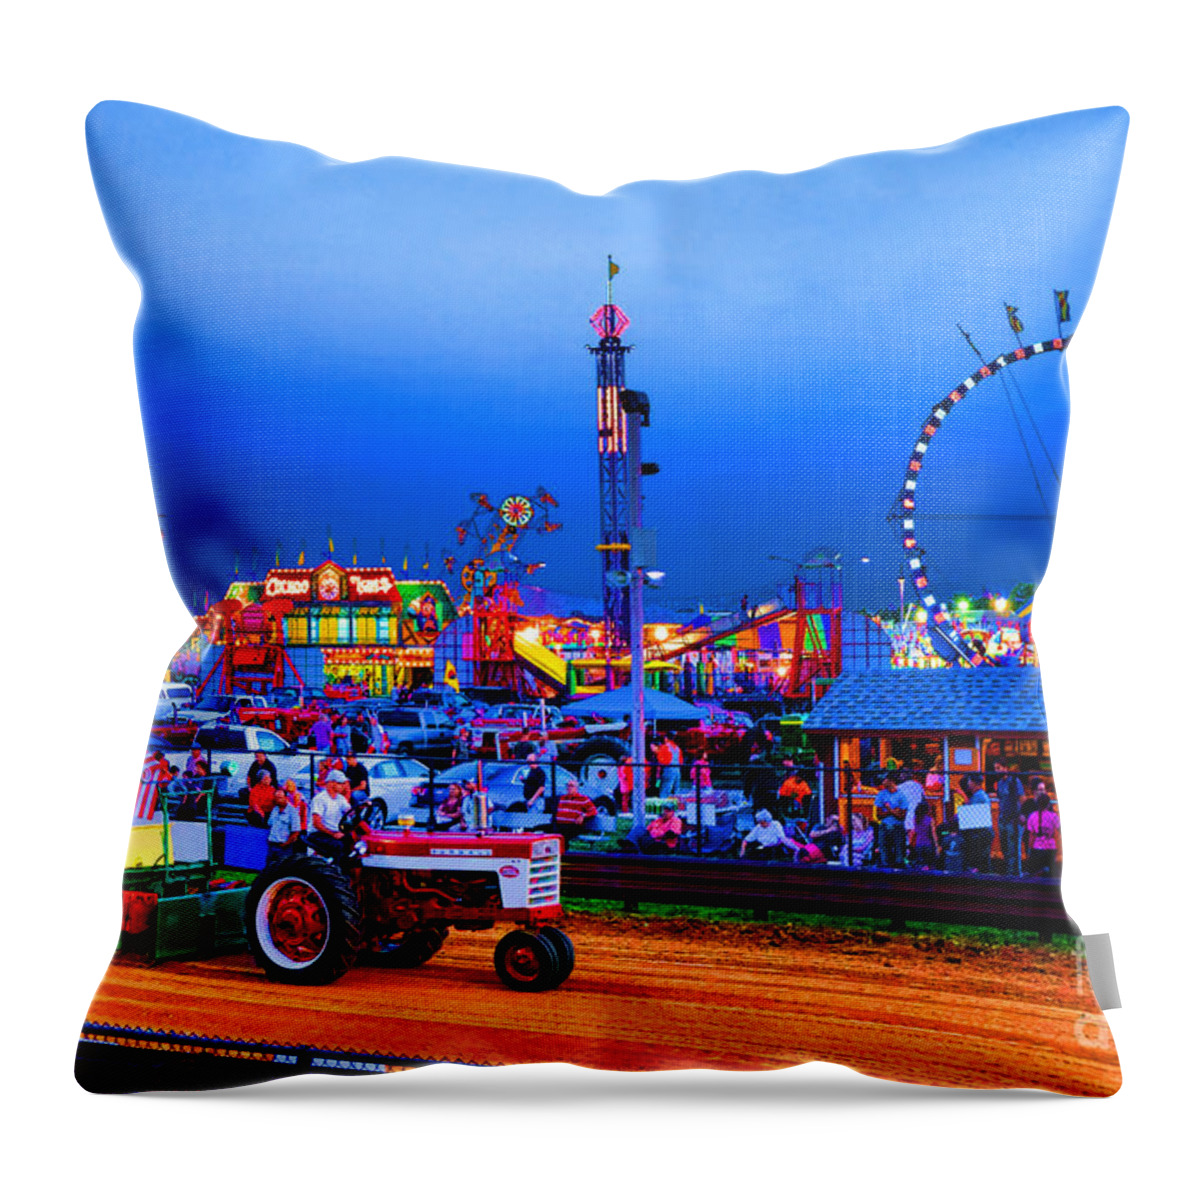 Tractor Throw Pillow featuring the photograph Tractor Pull At the County Fair by Olivier Le Queinec